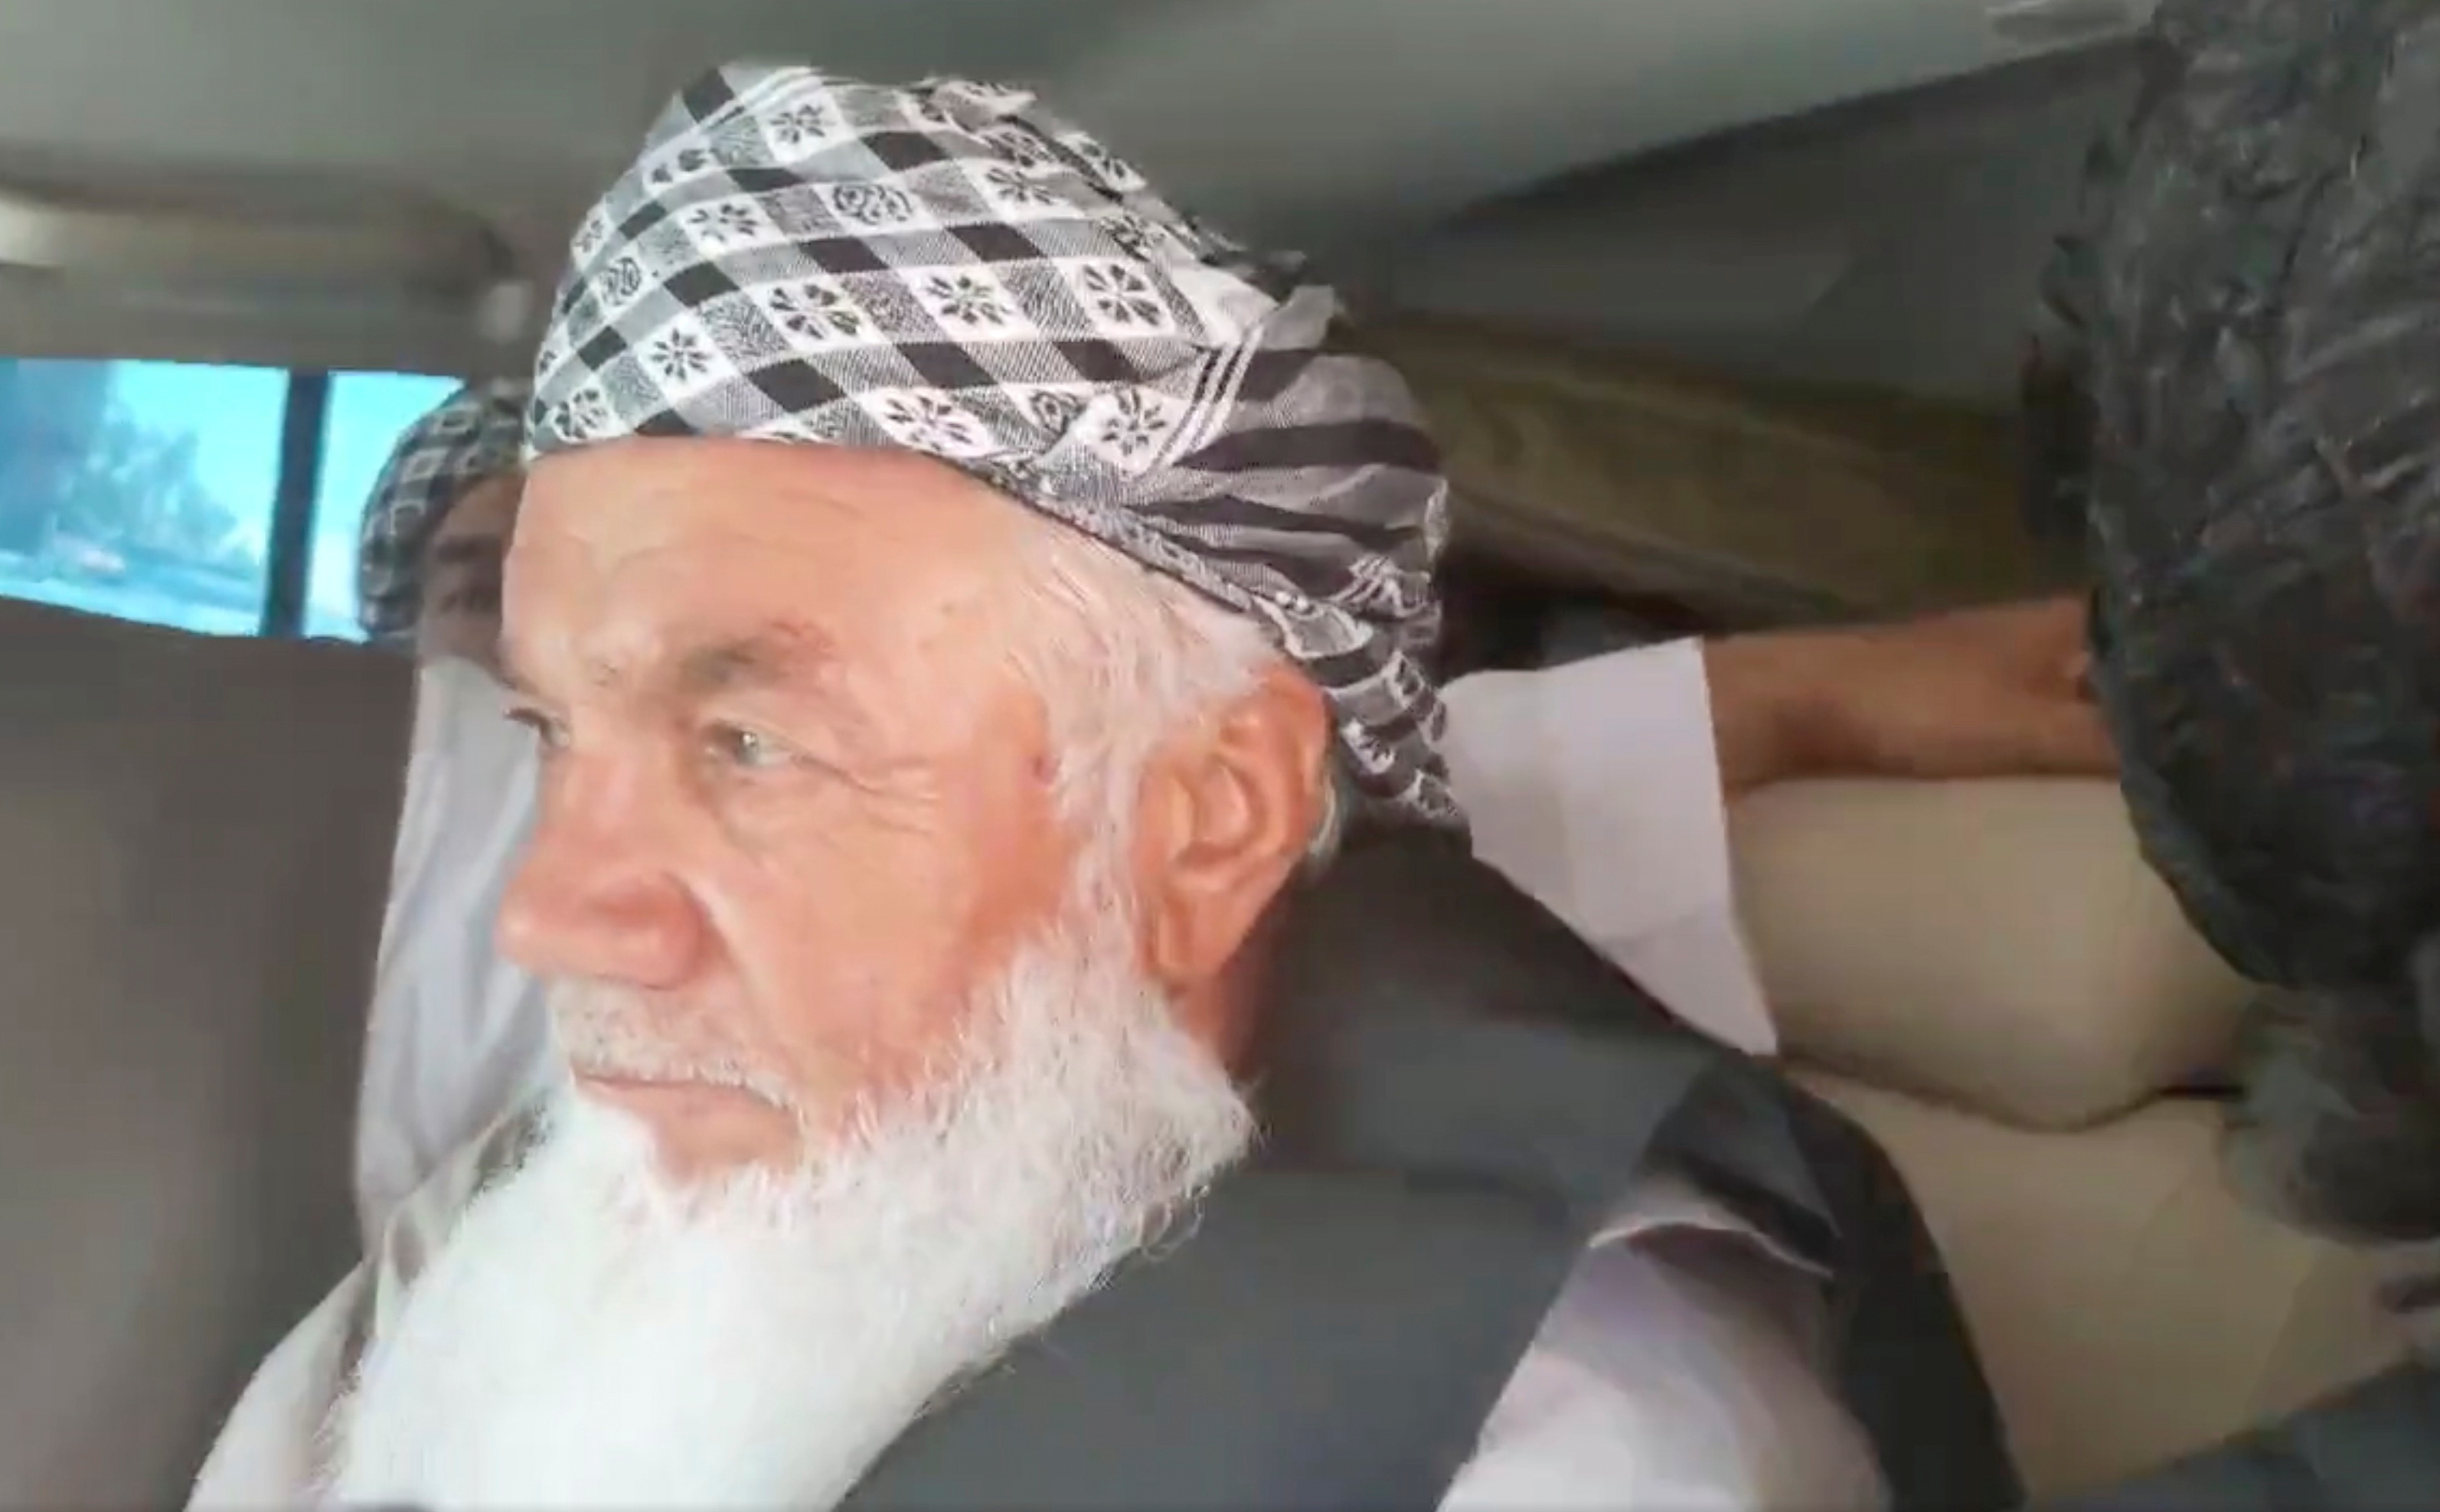 Ismail Khan, a veteran local commander leading militia resistance in Herat, Afghanistan, speaks to a Taliban media arm while in their custody, in this screen grab taken from an undated video from social media uploaded on August 13, 2021. TALIBAN HANDOUT/via REUTERS